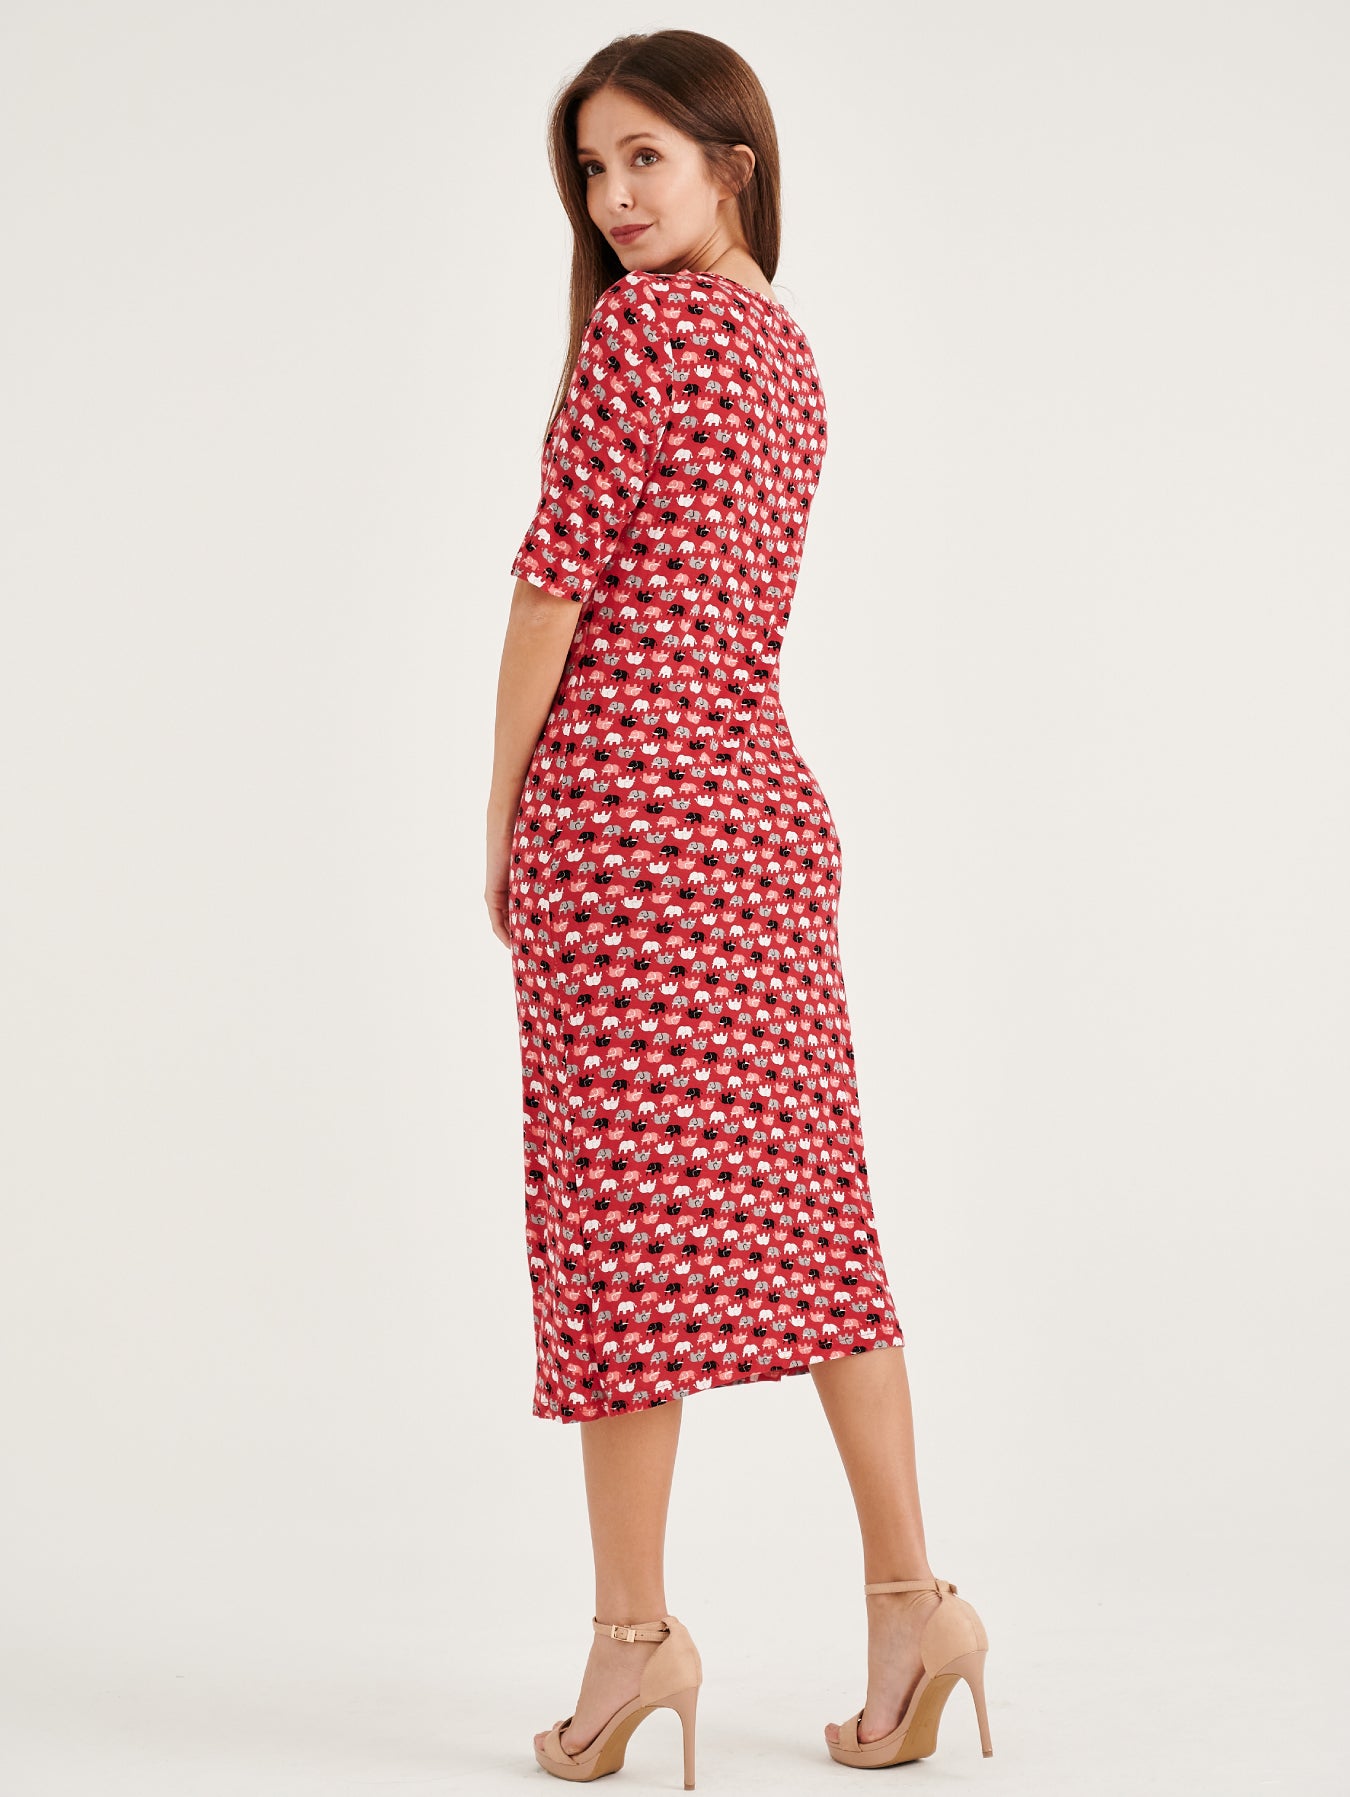 Nursing and maternity dress with a comfortable fit